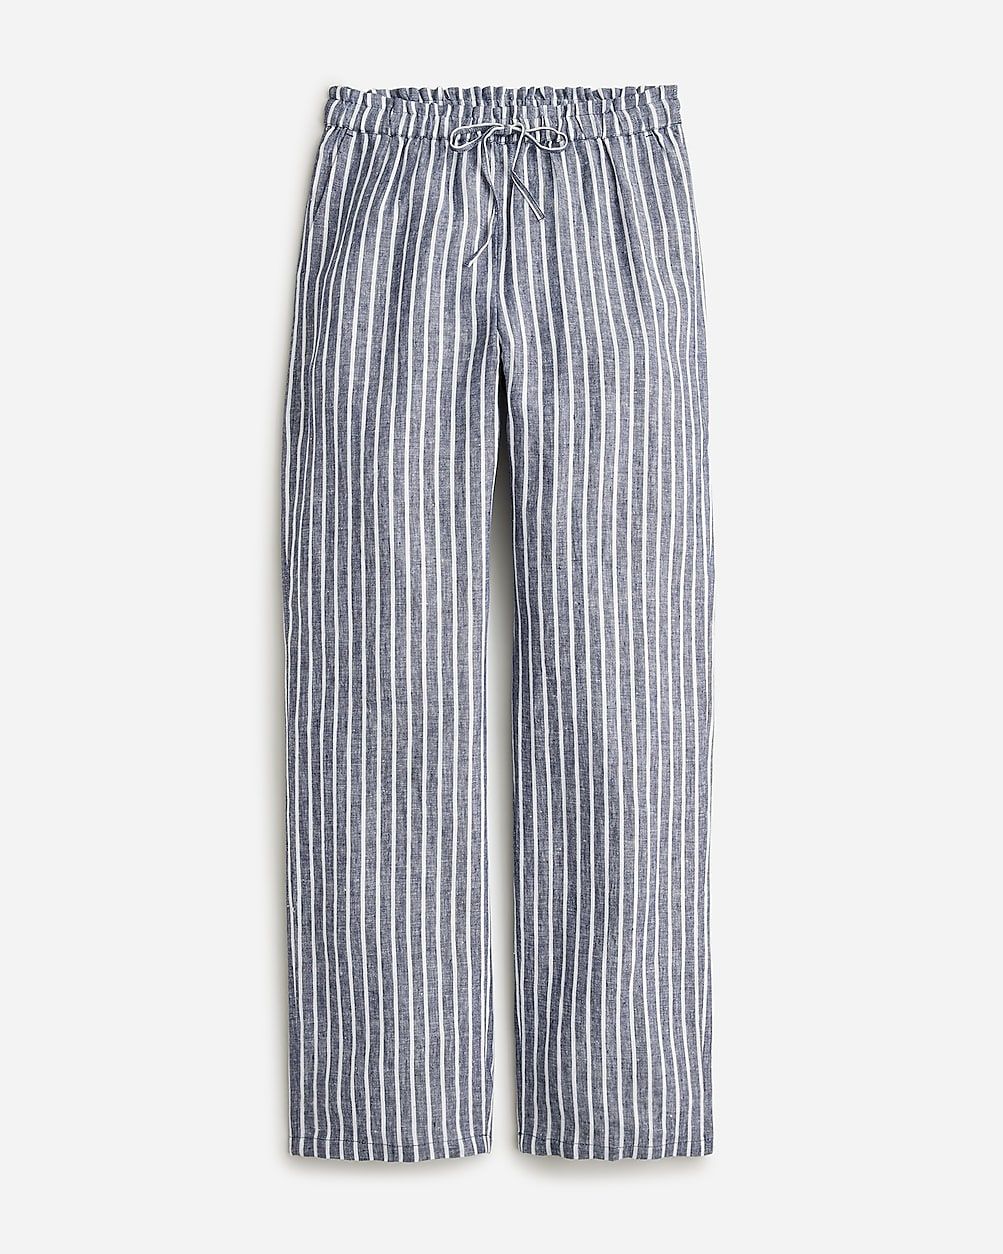 Soleil pant in striped linen | J.Crew US